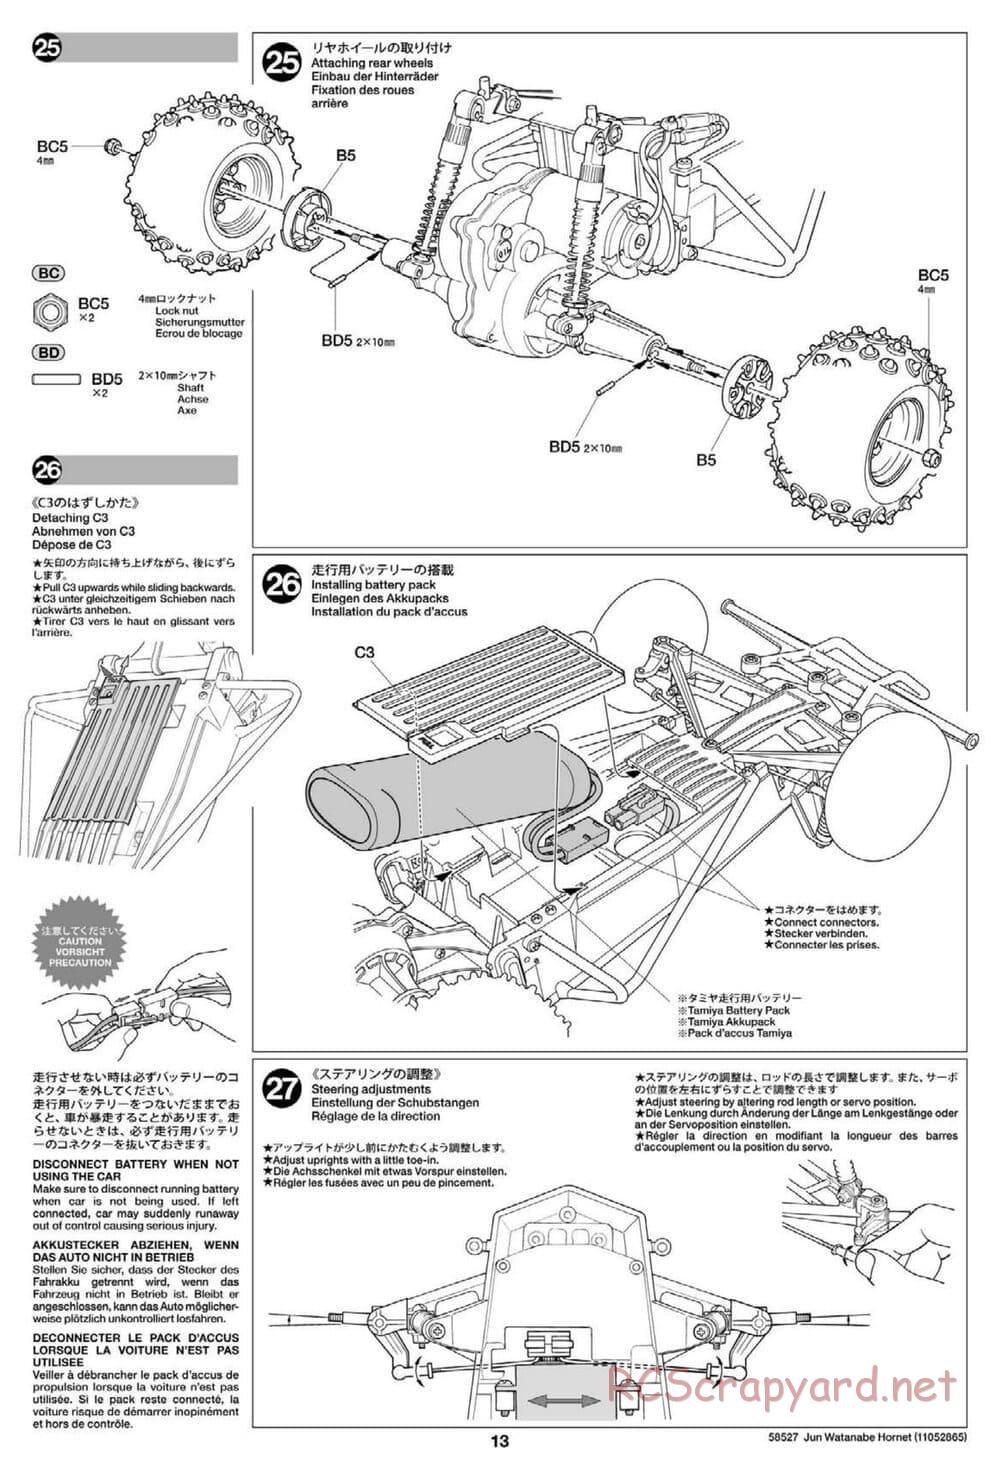 Tamiya - The Hornet by Jun Watanabe - GH Chassis - Manual - Page 13